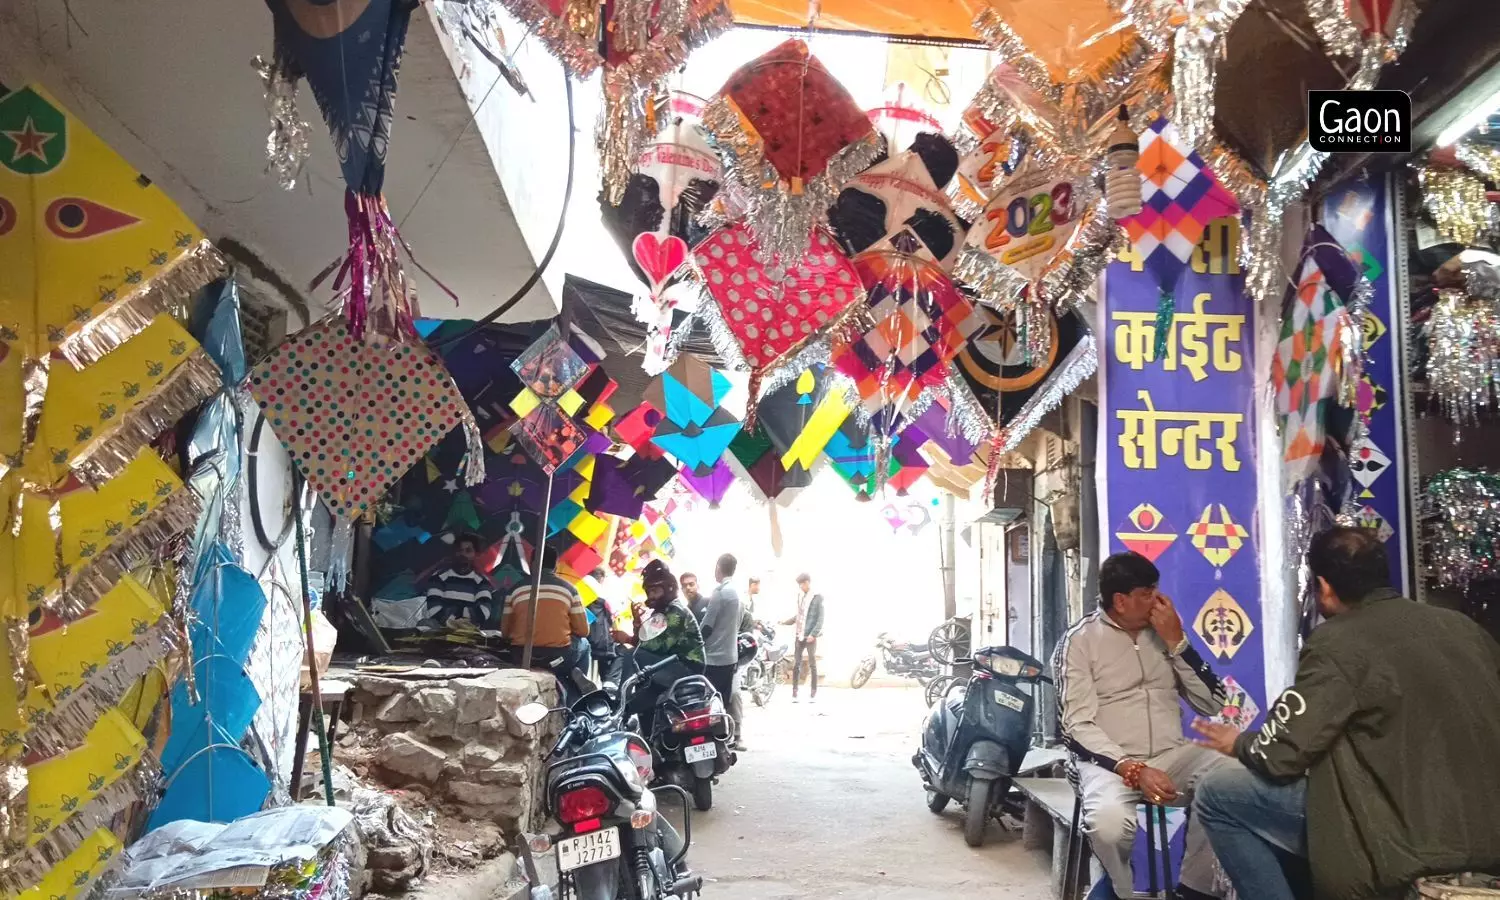 According to shopkeepers in Handipura, this year the sale of kites is low due to the extreme cold wave that has gripped north India. 